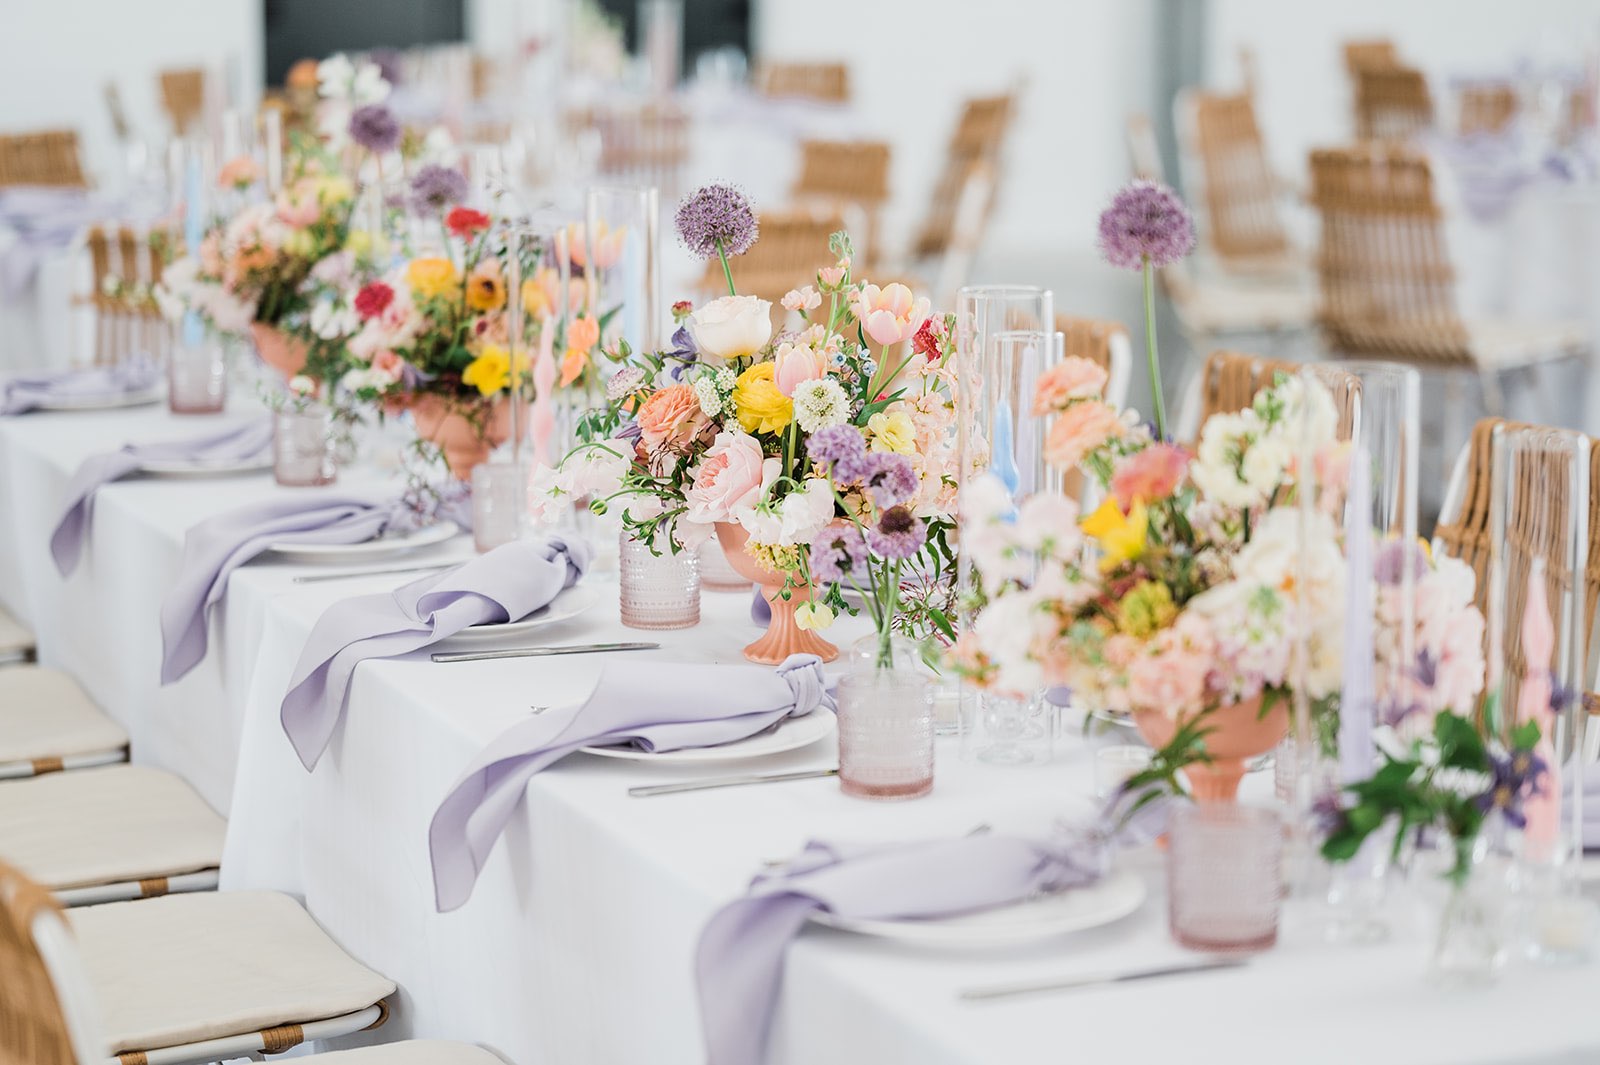 Colorful wedding head table with pastel flowers, lavender napkins and blush water goblets